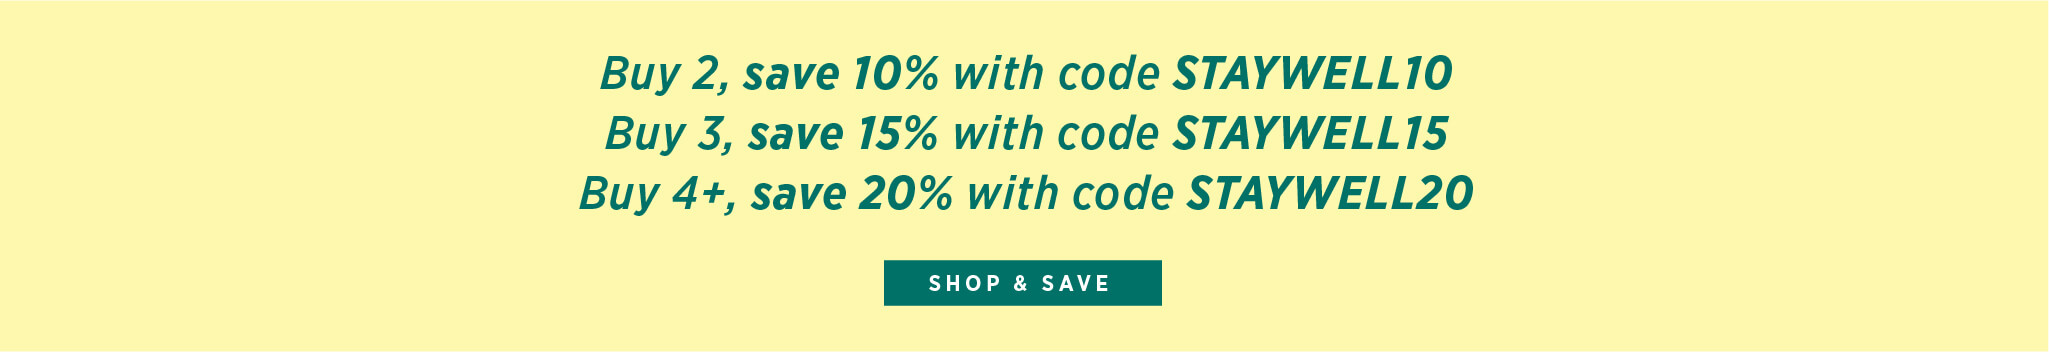 Shop and save up to 20% off all immune products: Buy 2, save 10% with code STAYWELL10, buy 3, save 15% with code STAYWELL15, buy 4+, save 20% with code STAYWELL20